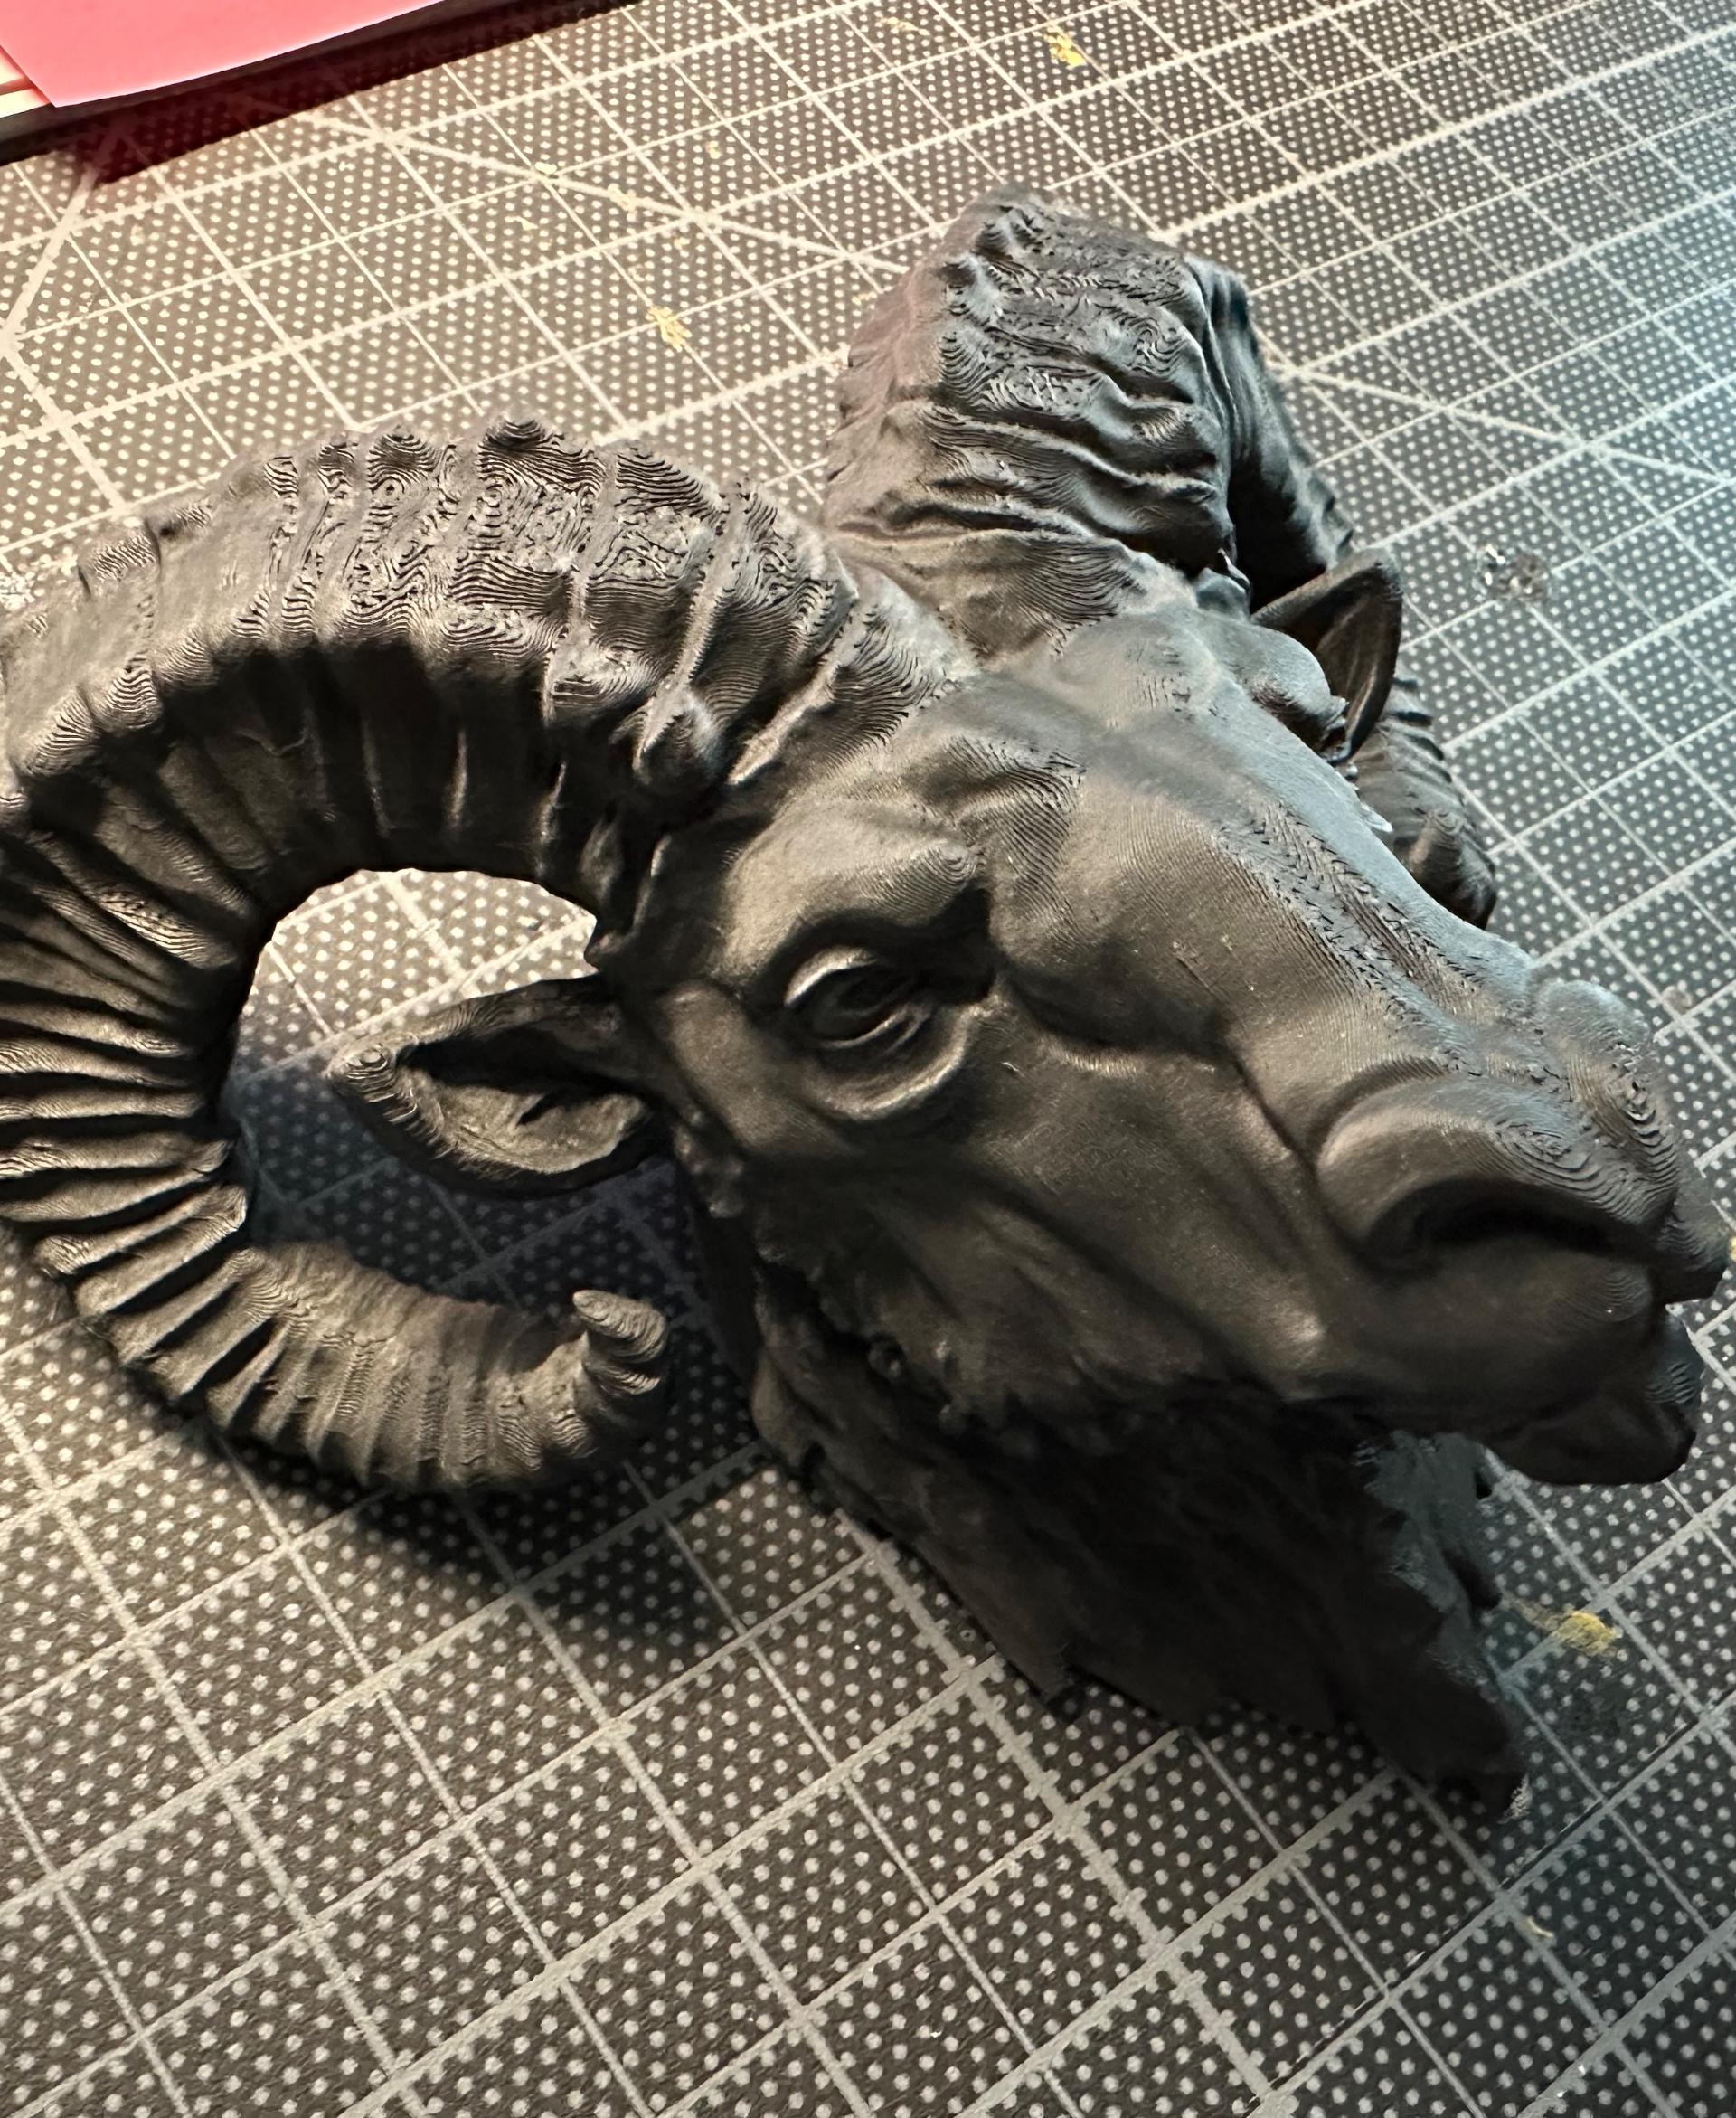 Ram  - Printed with automatic slim tree supports as a precaution and added a wire wall hook to the back for mounting. It's an amazing piece of art. - 3d model